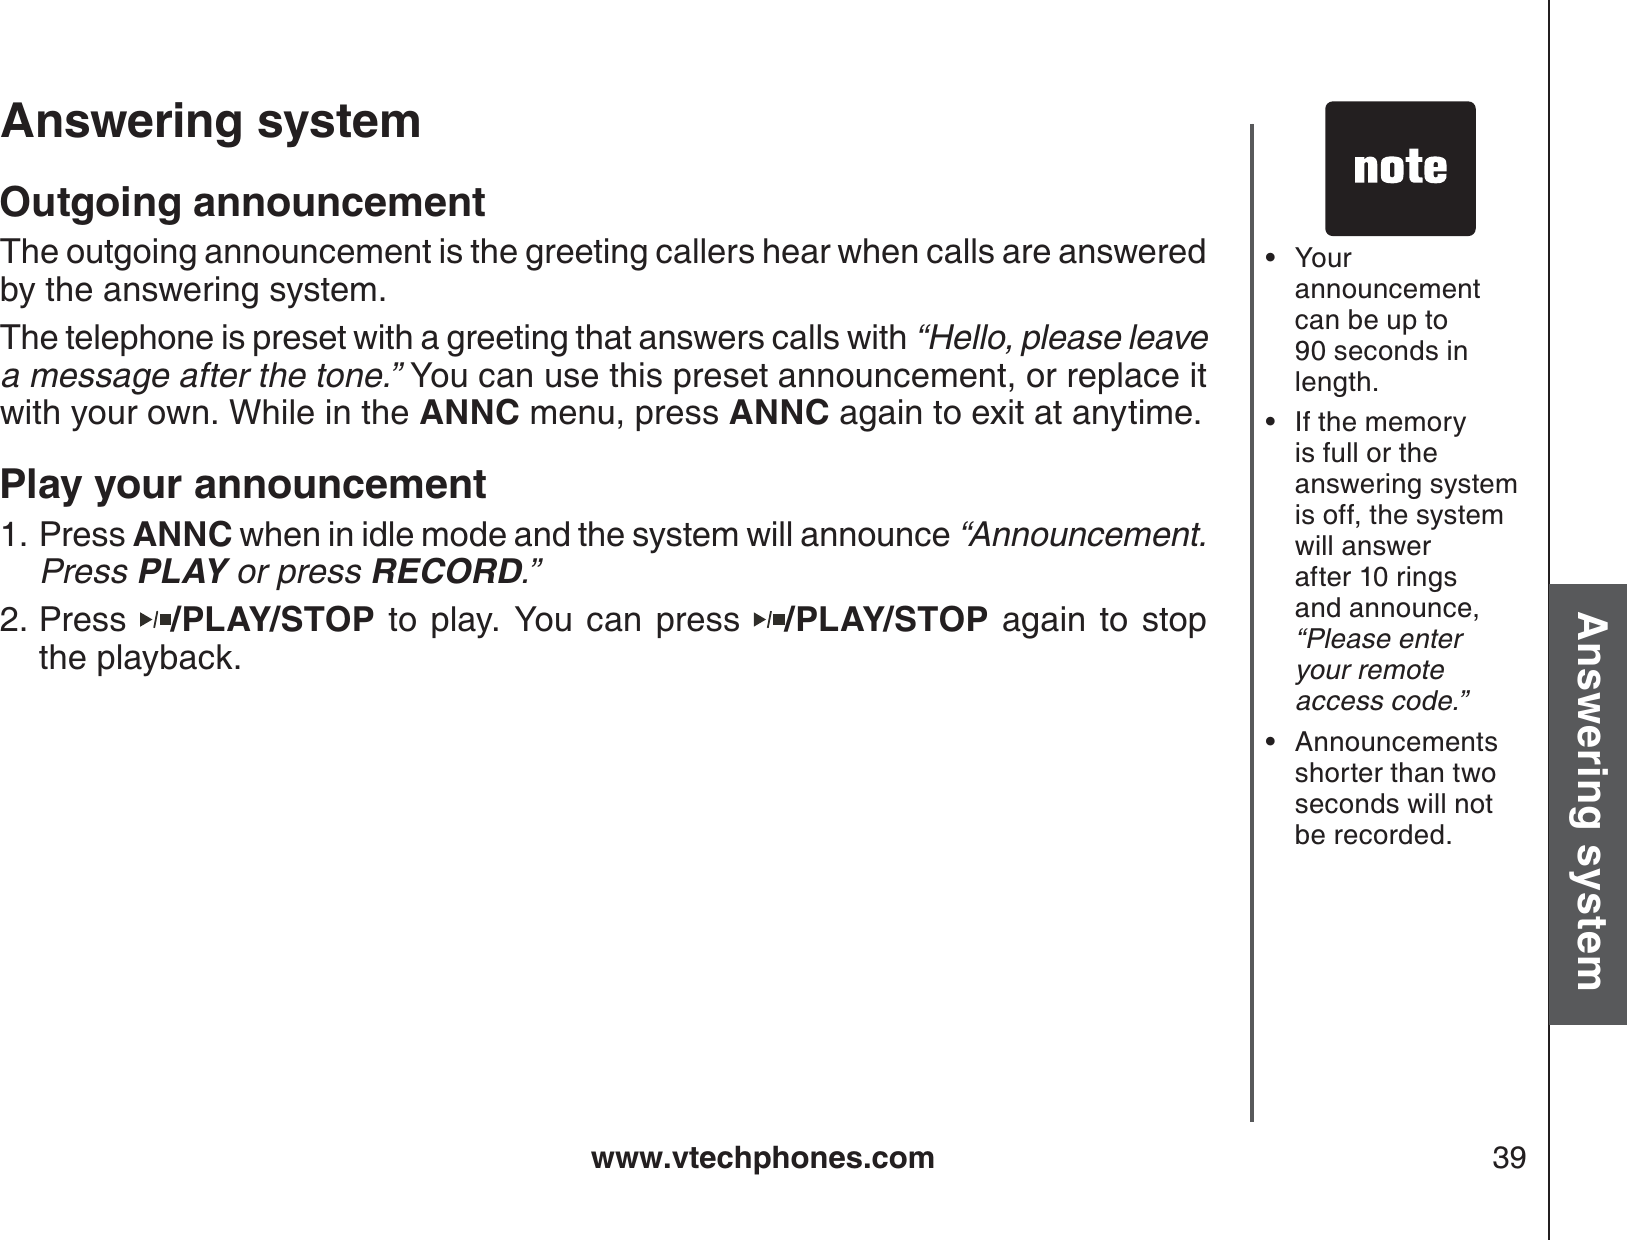 www.vtechphones.com 39Basic operationAnswering systemAnswering system Outgoing announcementThe outgoing announcement is the greeting callers hear when calls are answered by the answering system.The telephone is preset with a greeting that answers calls with “Hello, please leave a message after the tone.” You can use this preset announcement, or replace itwith your own. While in the ANNC menu, press ANNC again to exit at anytime.Play your announcement Press ANNC when in idle mode and the system will announce “Announcement.  Press PLAY or press RECORD.”Press /PLAY/STOP to play. You can press  /PLAY/STOP again to stop the playback.  1.2.Your  announcement can be up to 90 seconds inlength.If the memory is full or the answering system is off, the system will answer after 10 rings and announce, “Please enter your remote access code.”Announcements shorter than two seconds will not be recorded.•••